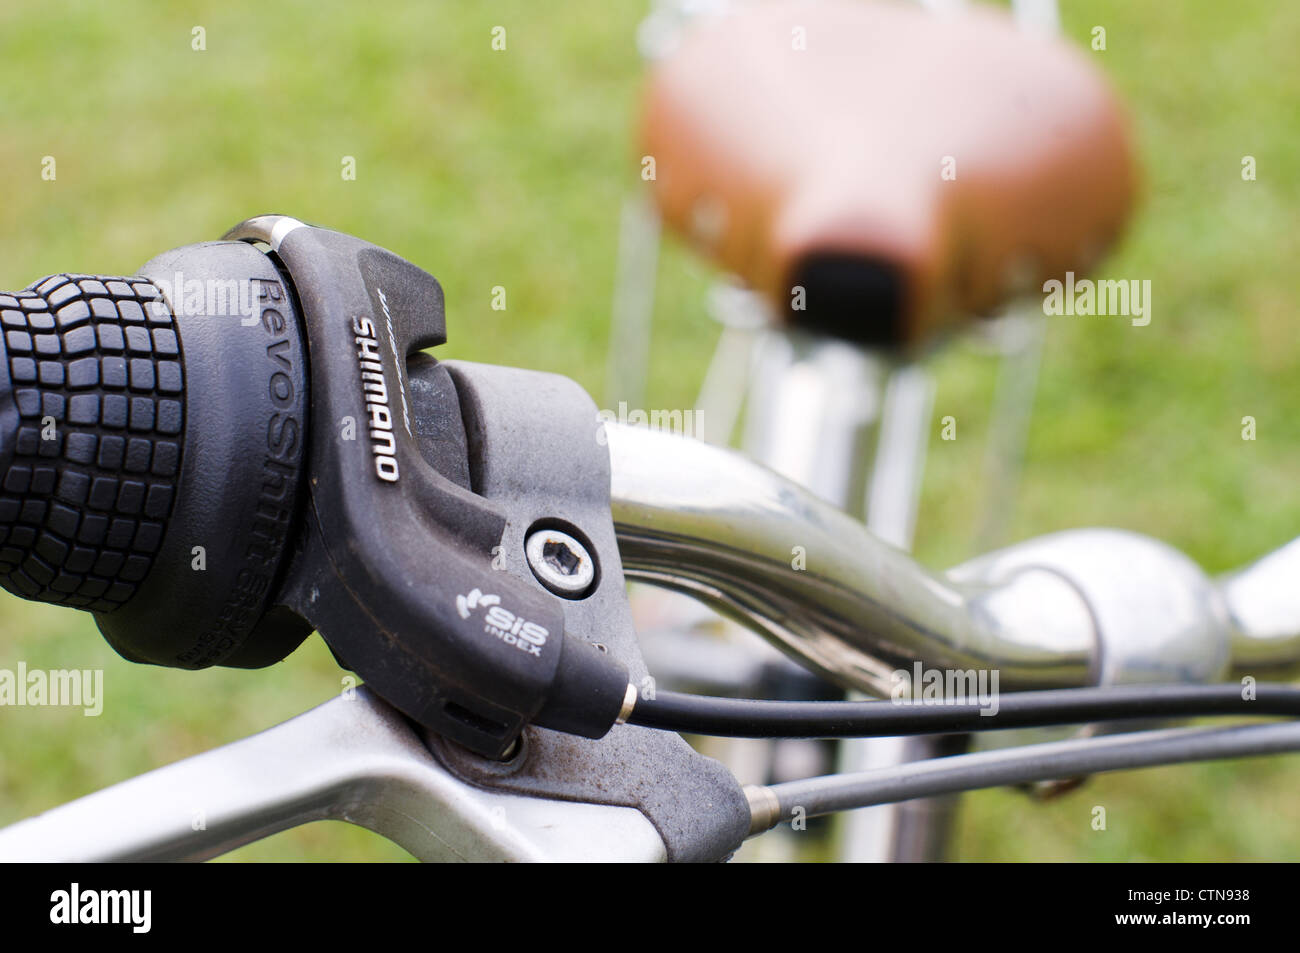 a view of shimano gear shift system of a bicycle Stock Photo